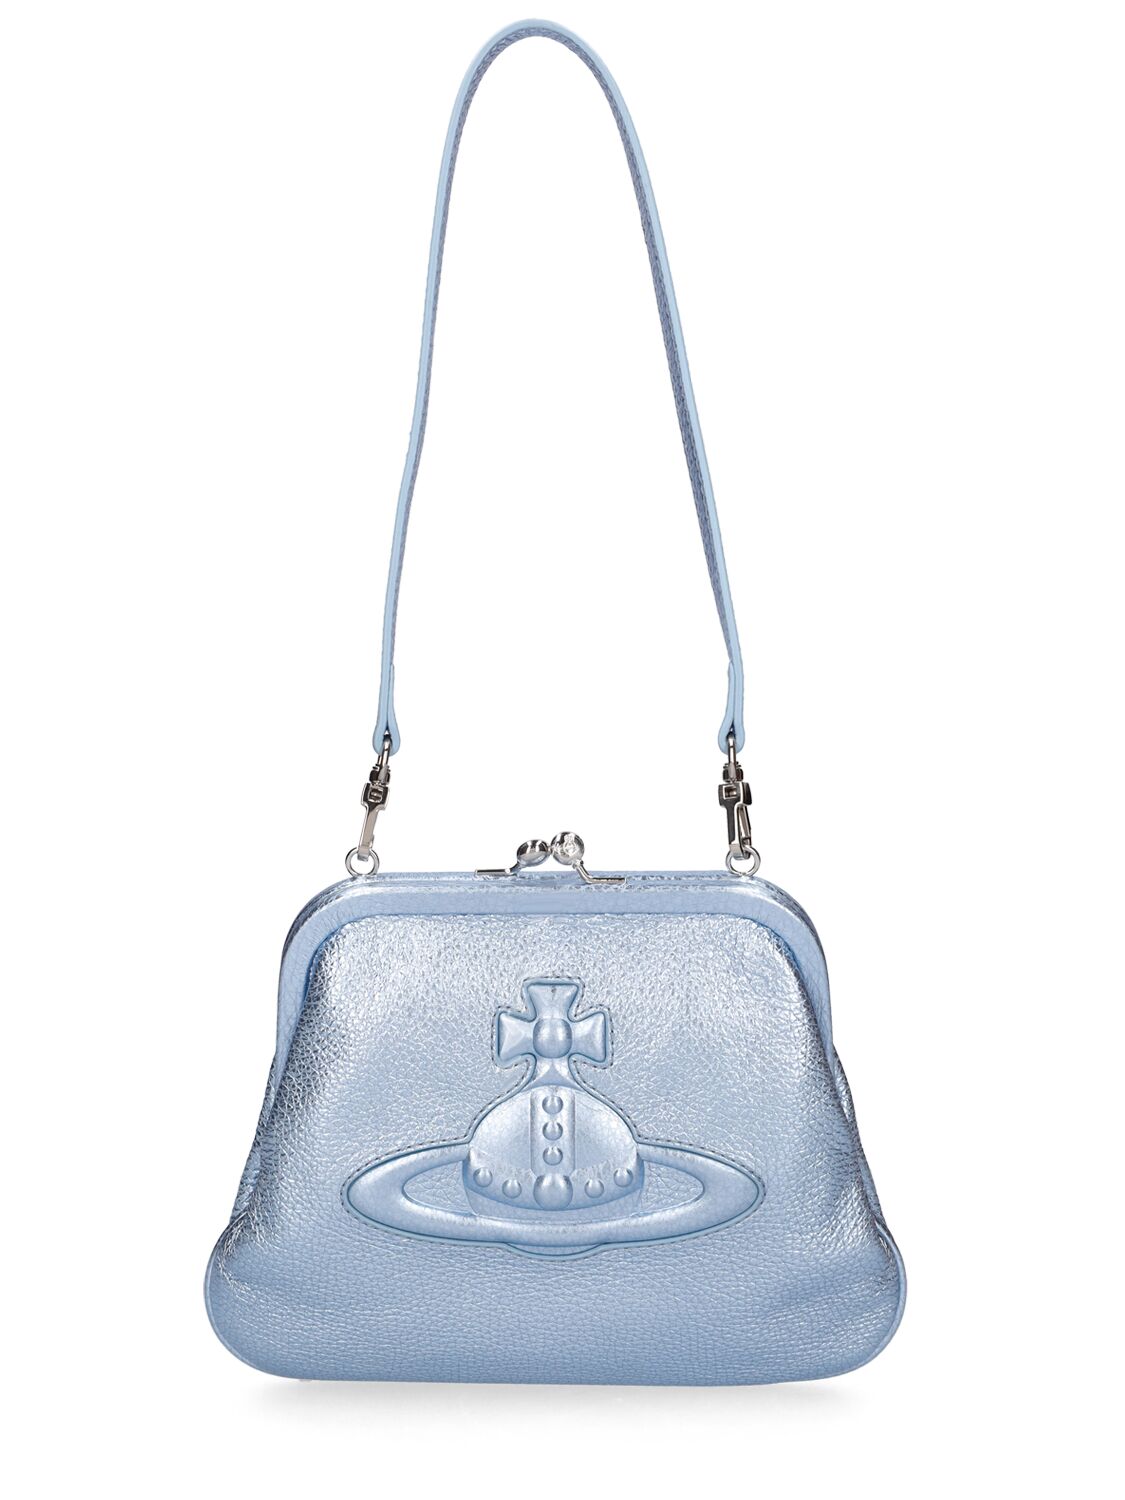 Vivienne Westwood on X: A match made in heaven. The Yasmine bag